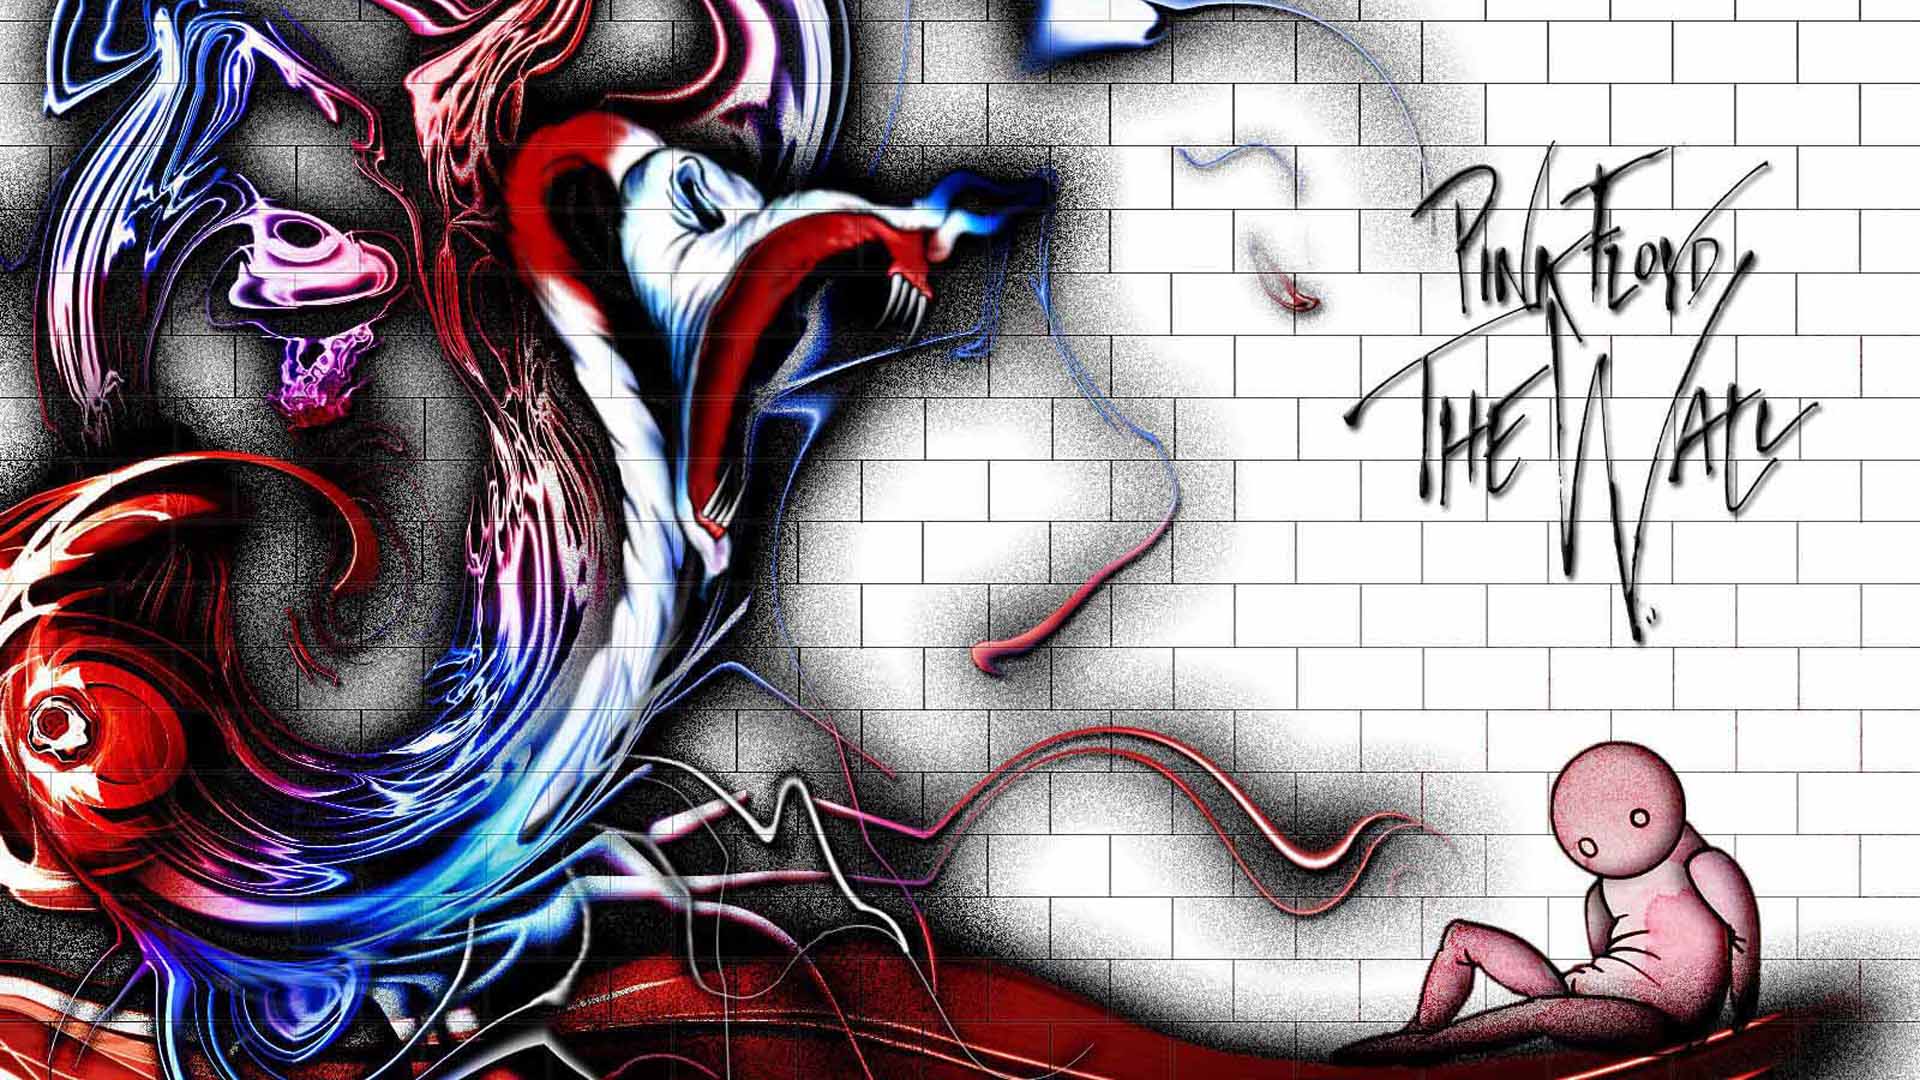 Pink Floyd The wall.